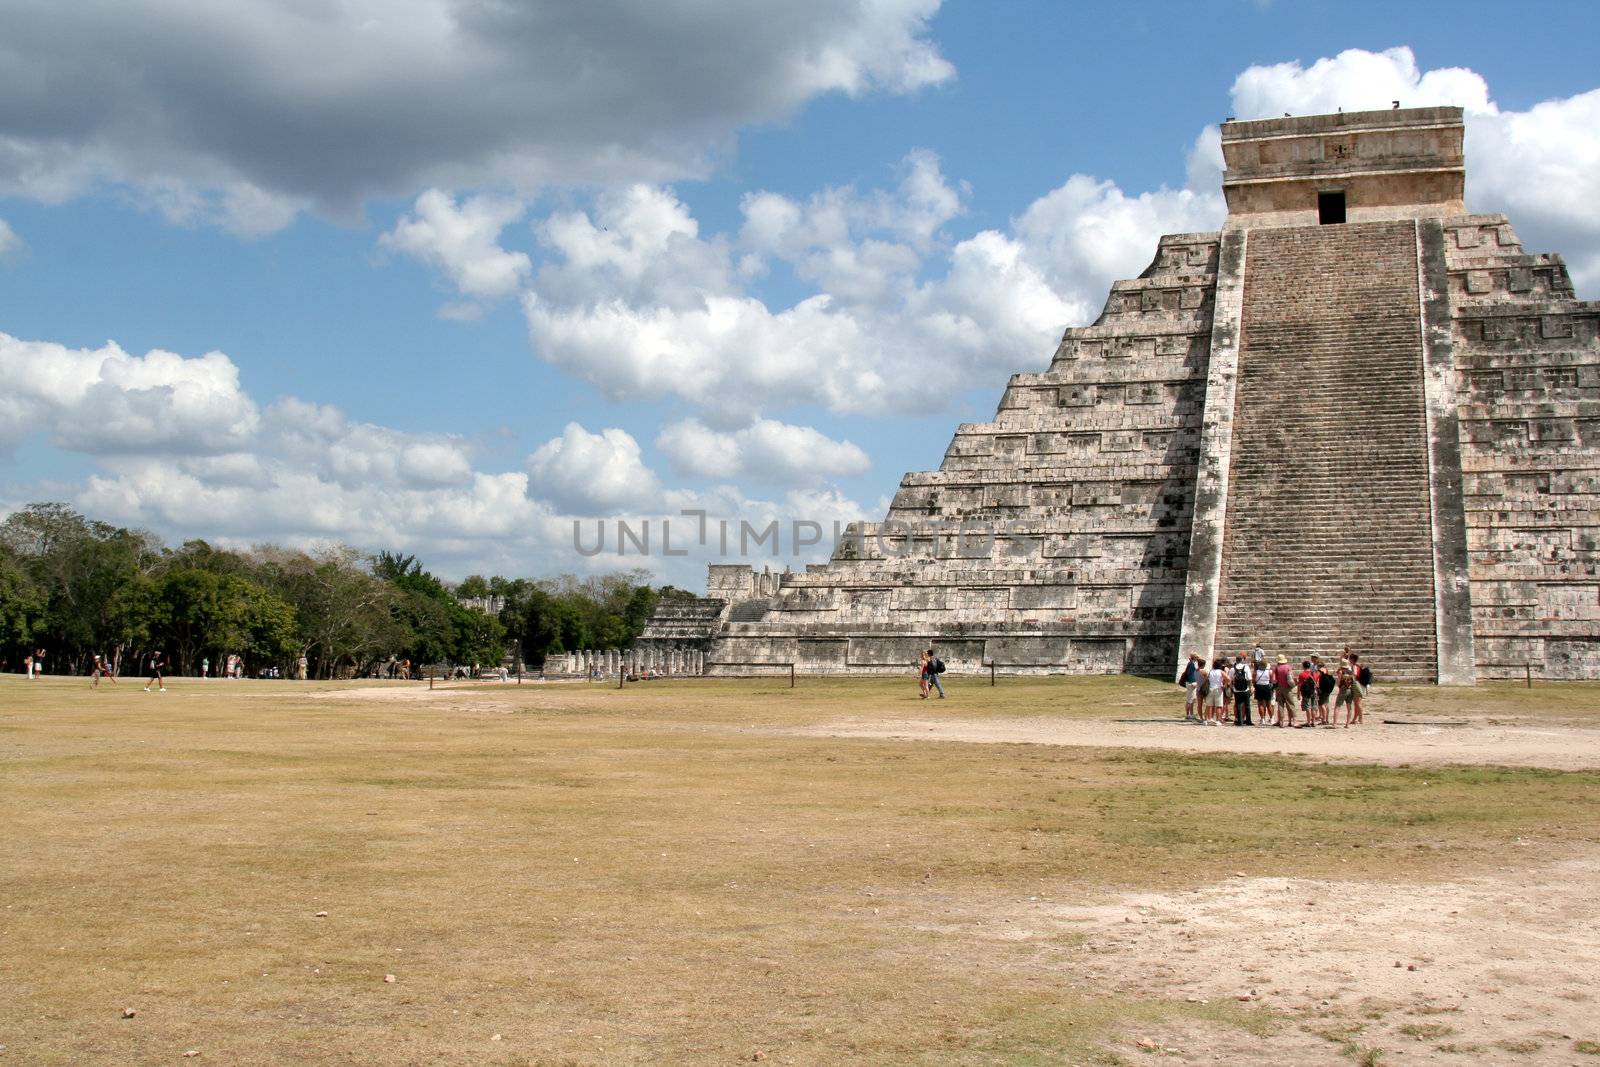 A crowd of tourists at Chichen Itza, (Mayan Ruins) in Mexico.